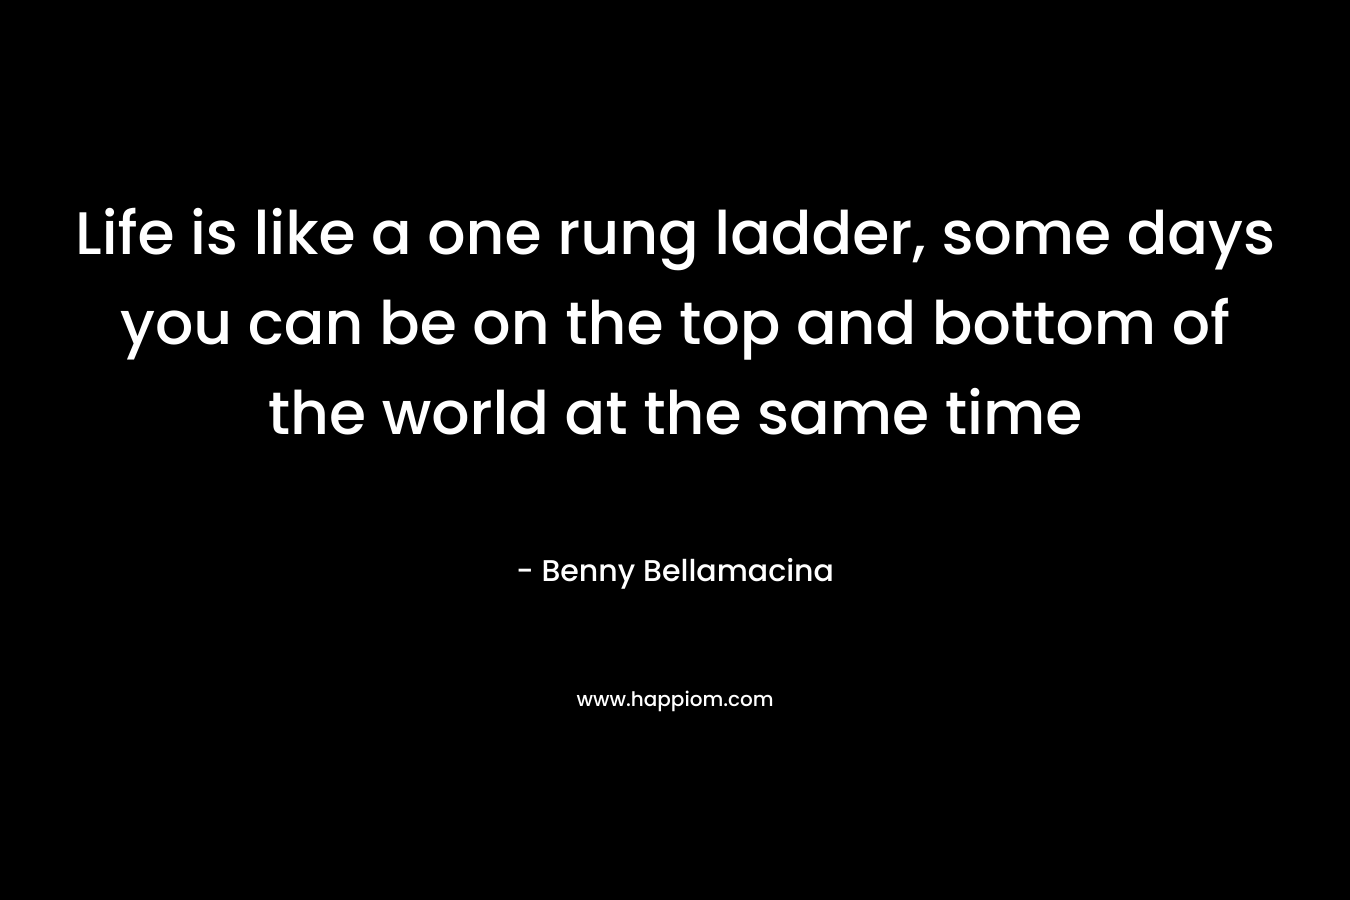 Life is like a one rung ladder, some days you can be on the top and bottom of the world at the same time – Benny Bellamacina